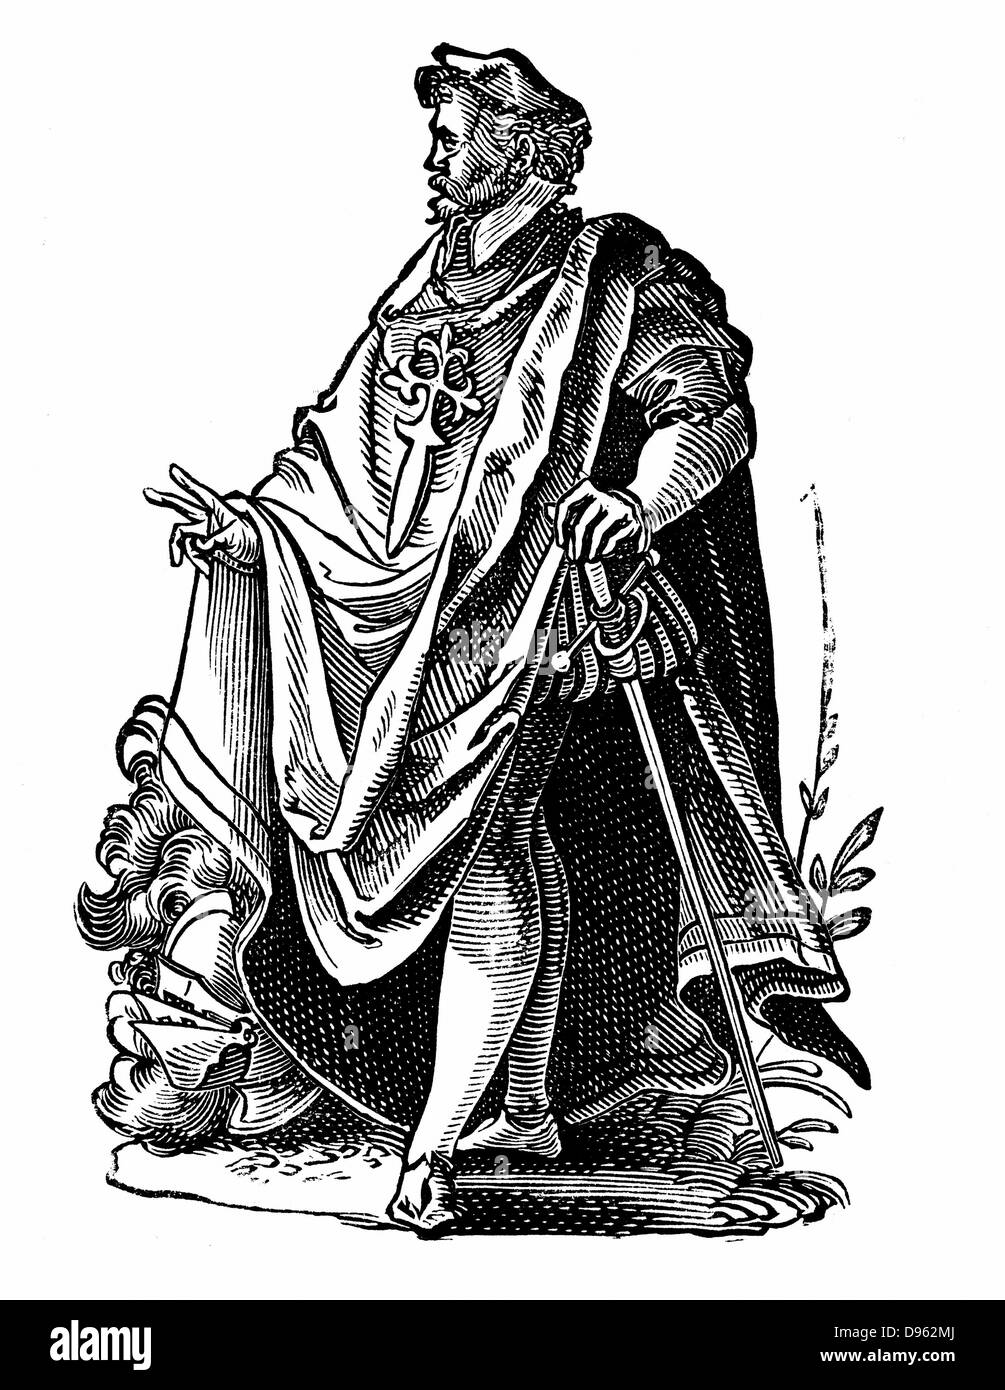 Knight Templar in travelling dress. Poor Knights of Christ and of the Temple of Solomon, founded c1119 to protect pilgrims from maruading Muslims. Order Suppressed by Pope Clement V in 1312. Woodcut by Jost Amman, 16th century. Stock Photo